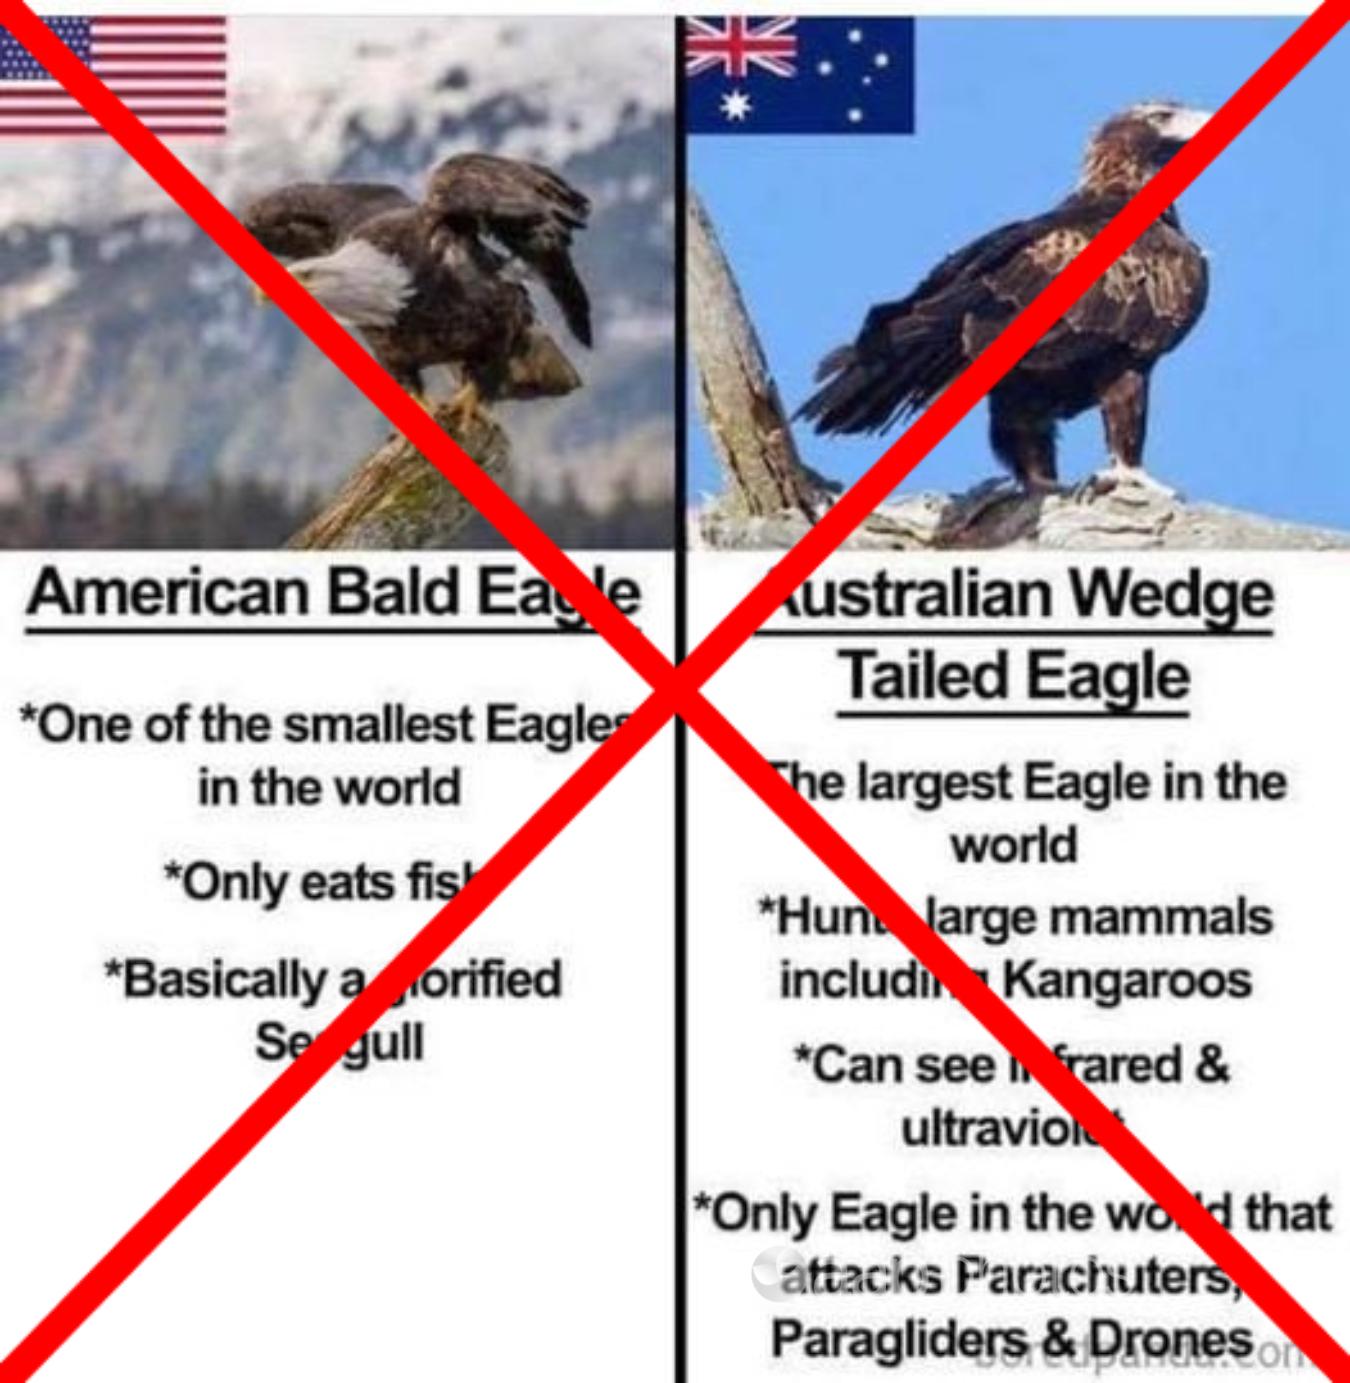 eagle comparison doesn't fly - Associated Press